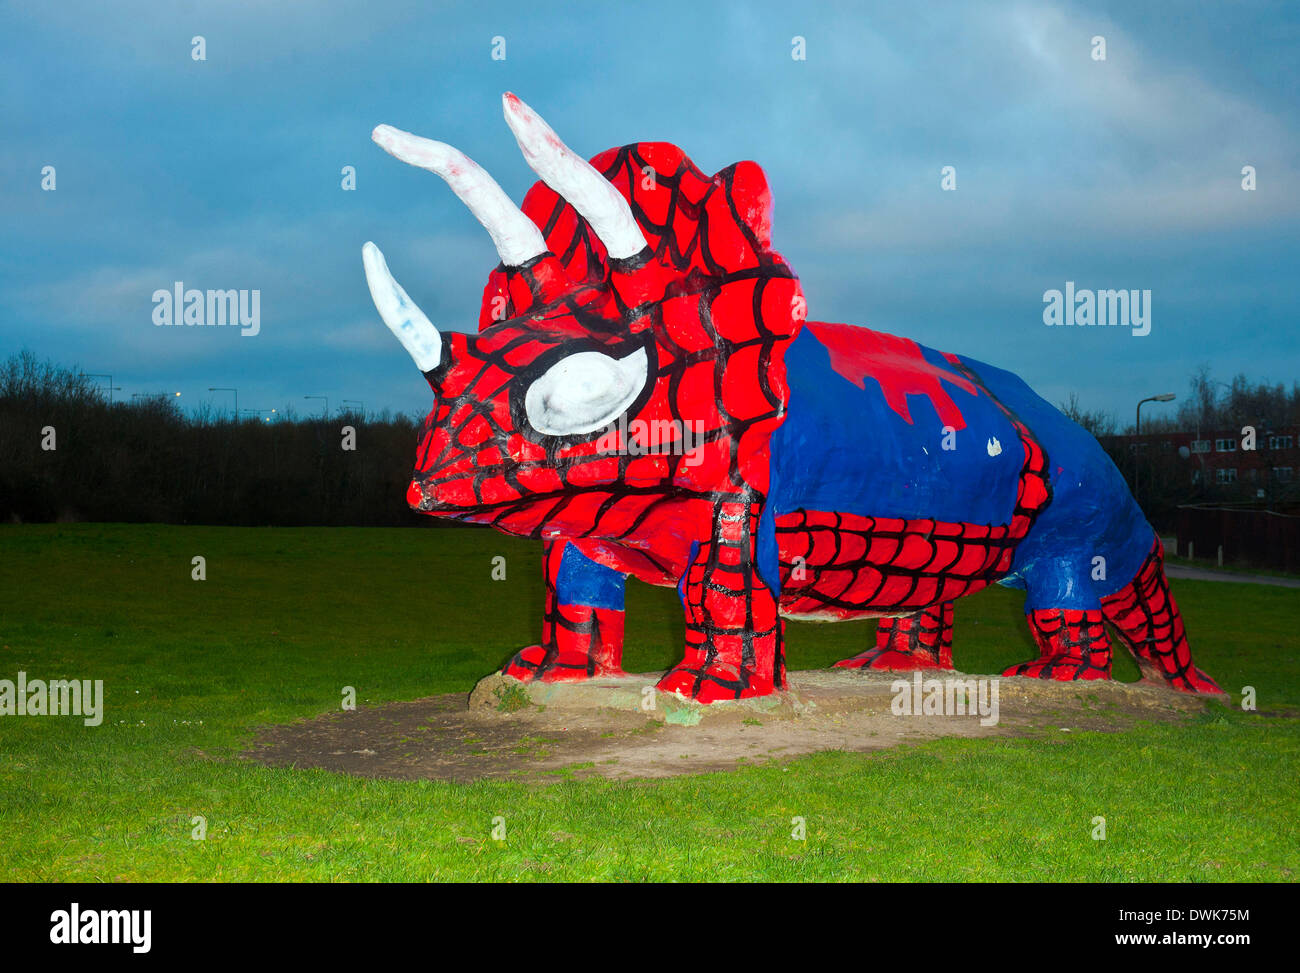 Milton Keynes, Bucks, UK. 10th March 2014. The Peartree Bridge dinosaur has had a superhero makeover after being painted to look like Spiderman on the of march its not the